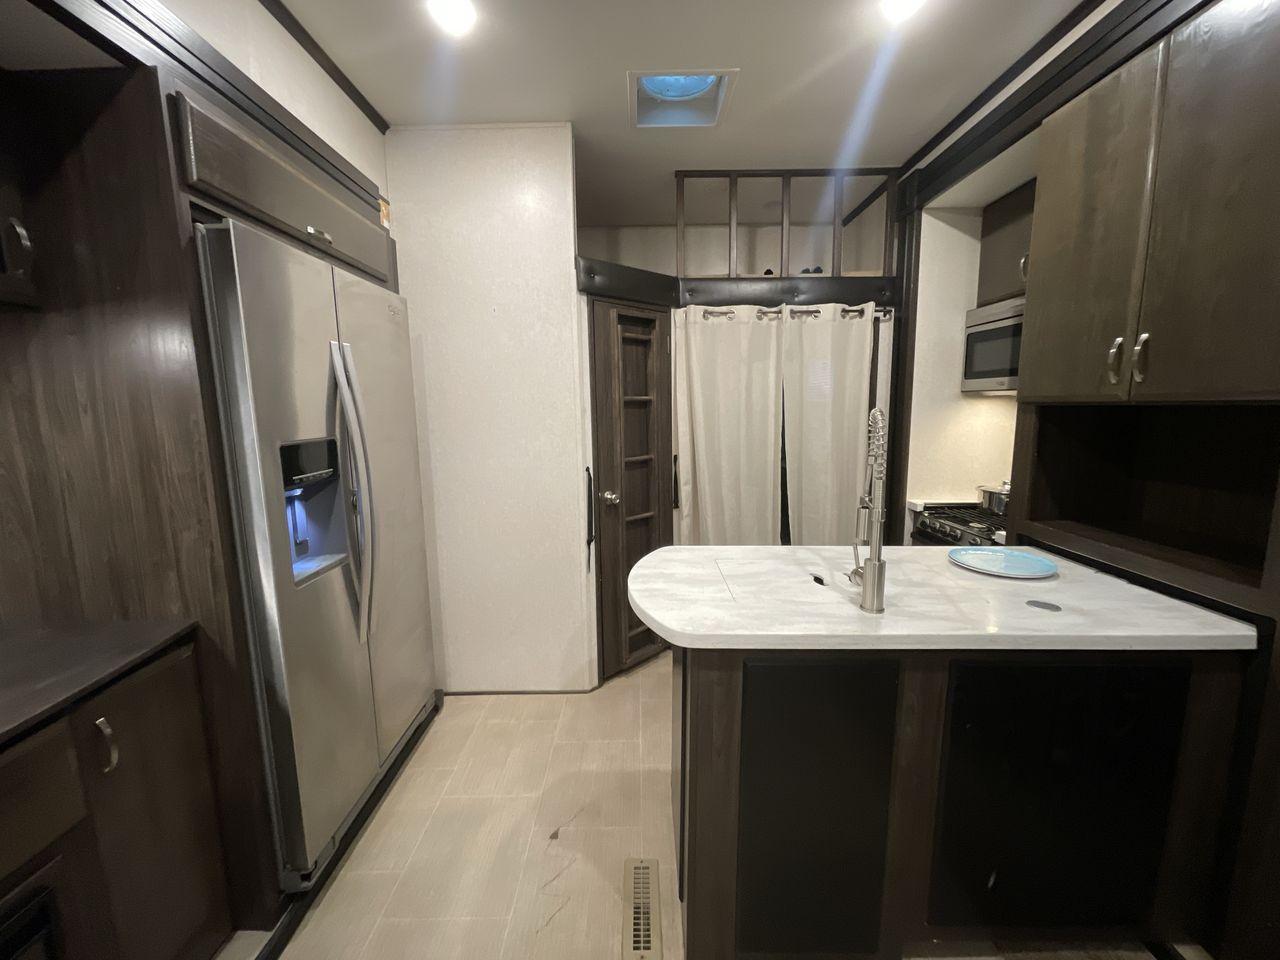 2018 GRAY JAYCO SEISMIC 4250 - (1UJCJSCV5J1) , Length: 44.92 ft. | Dry Weight: 15,570 lbs. | Gross Weight: 20,000 lbs. | Slides: 3 transmission, located at 4319 N Main St, Cleburne, TX, 76033, (817) 678-5133, 32.385960, -97.391212 - Set out to the great outdoors in this 2018 Jayco Seismic 4250 and enjoy all its amenities! This toy hauler measures just a bit under 45 ft. in length and 13.32 ft. in height, providing great space and comfort. It has a dry weight of 15,570 lbs. and a GVWR of 20,000 lbs. It also comes with automatic - Photo #18